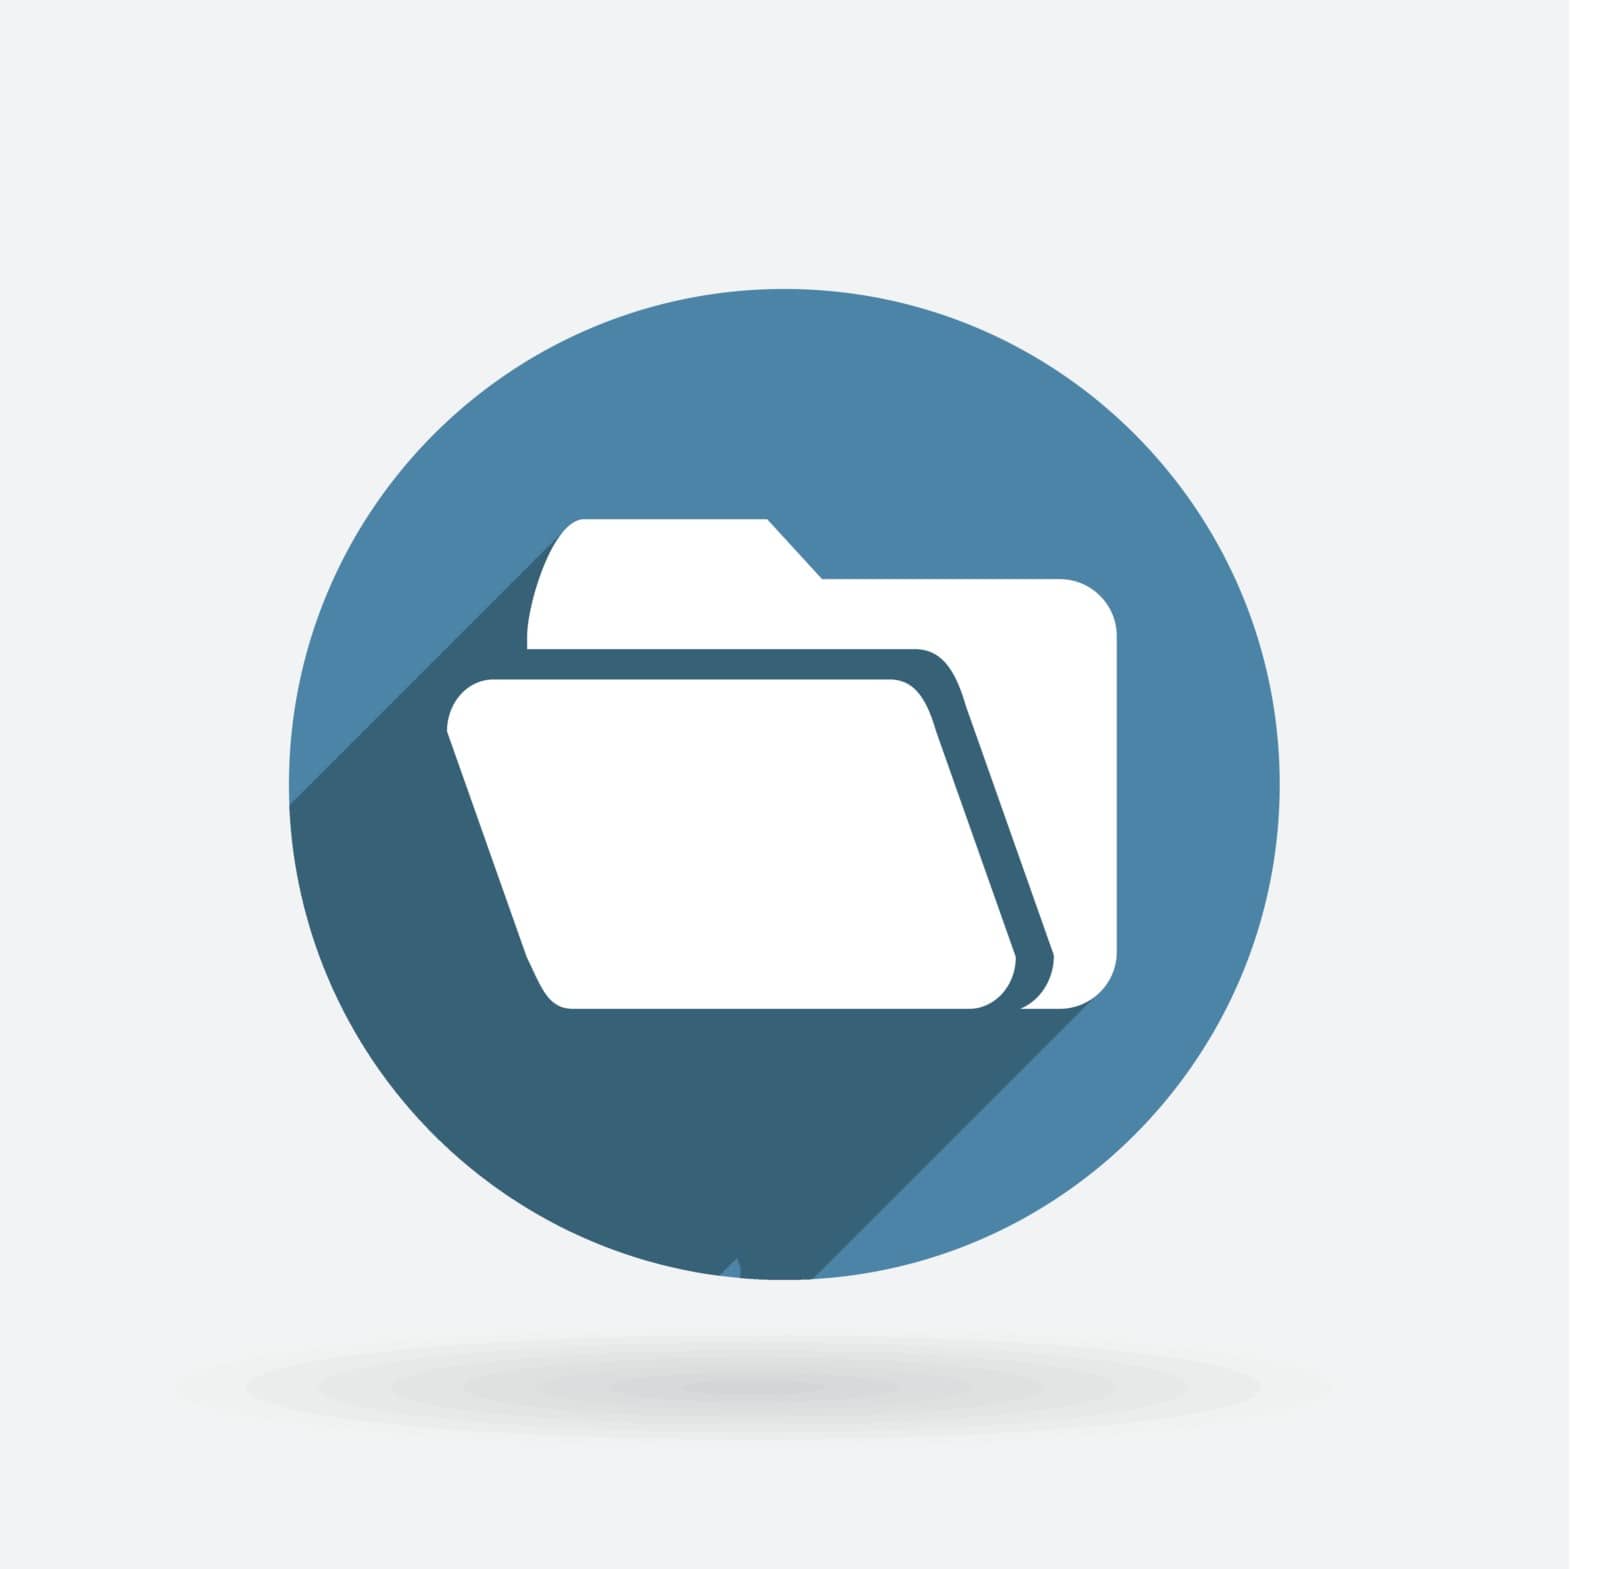 folder for documents. Circle blue icon with shadow. by LittleCuckoo